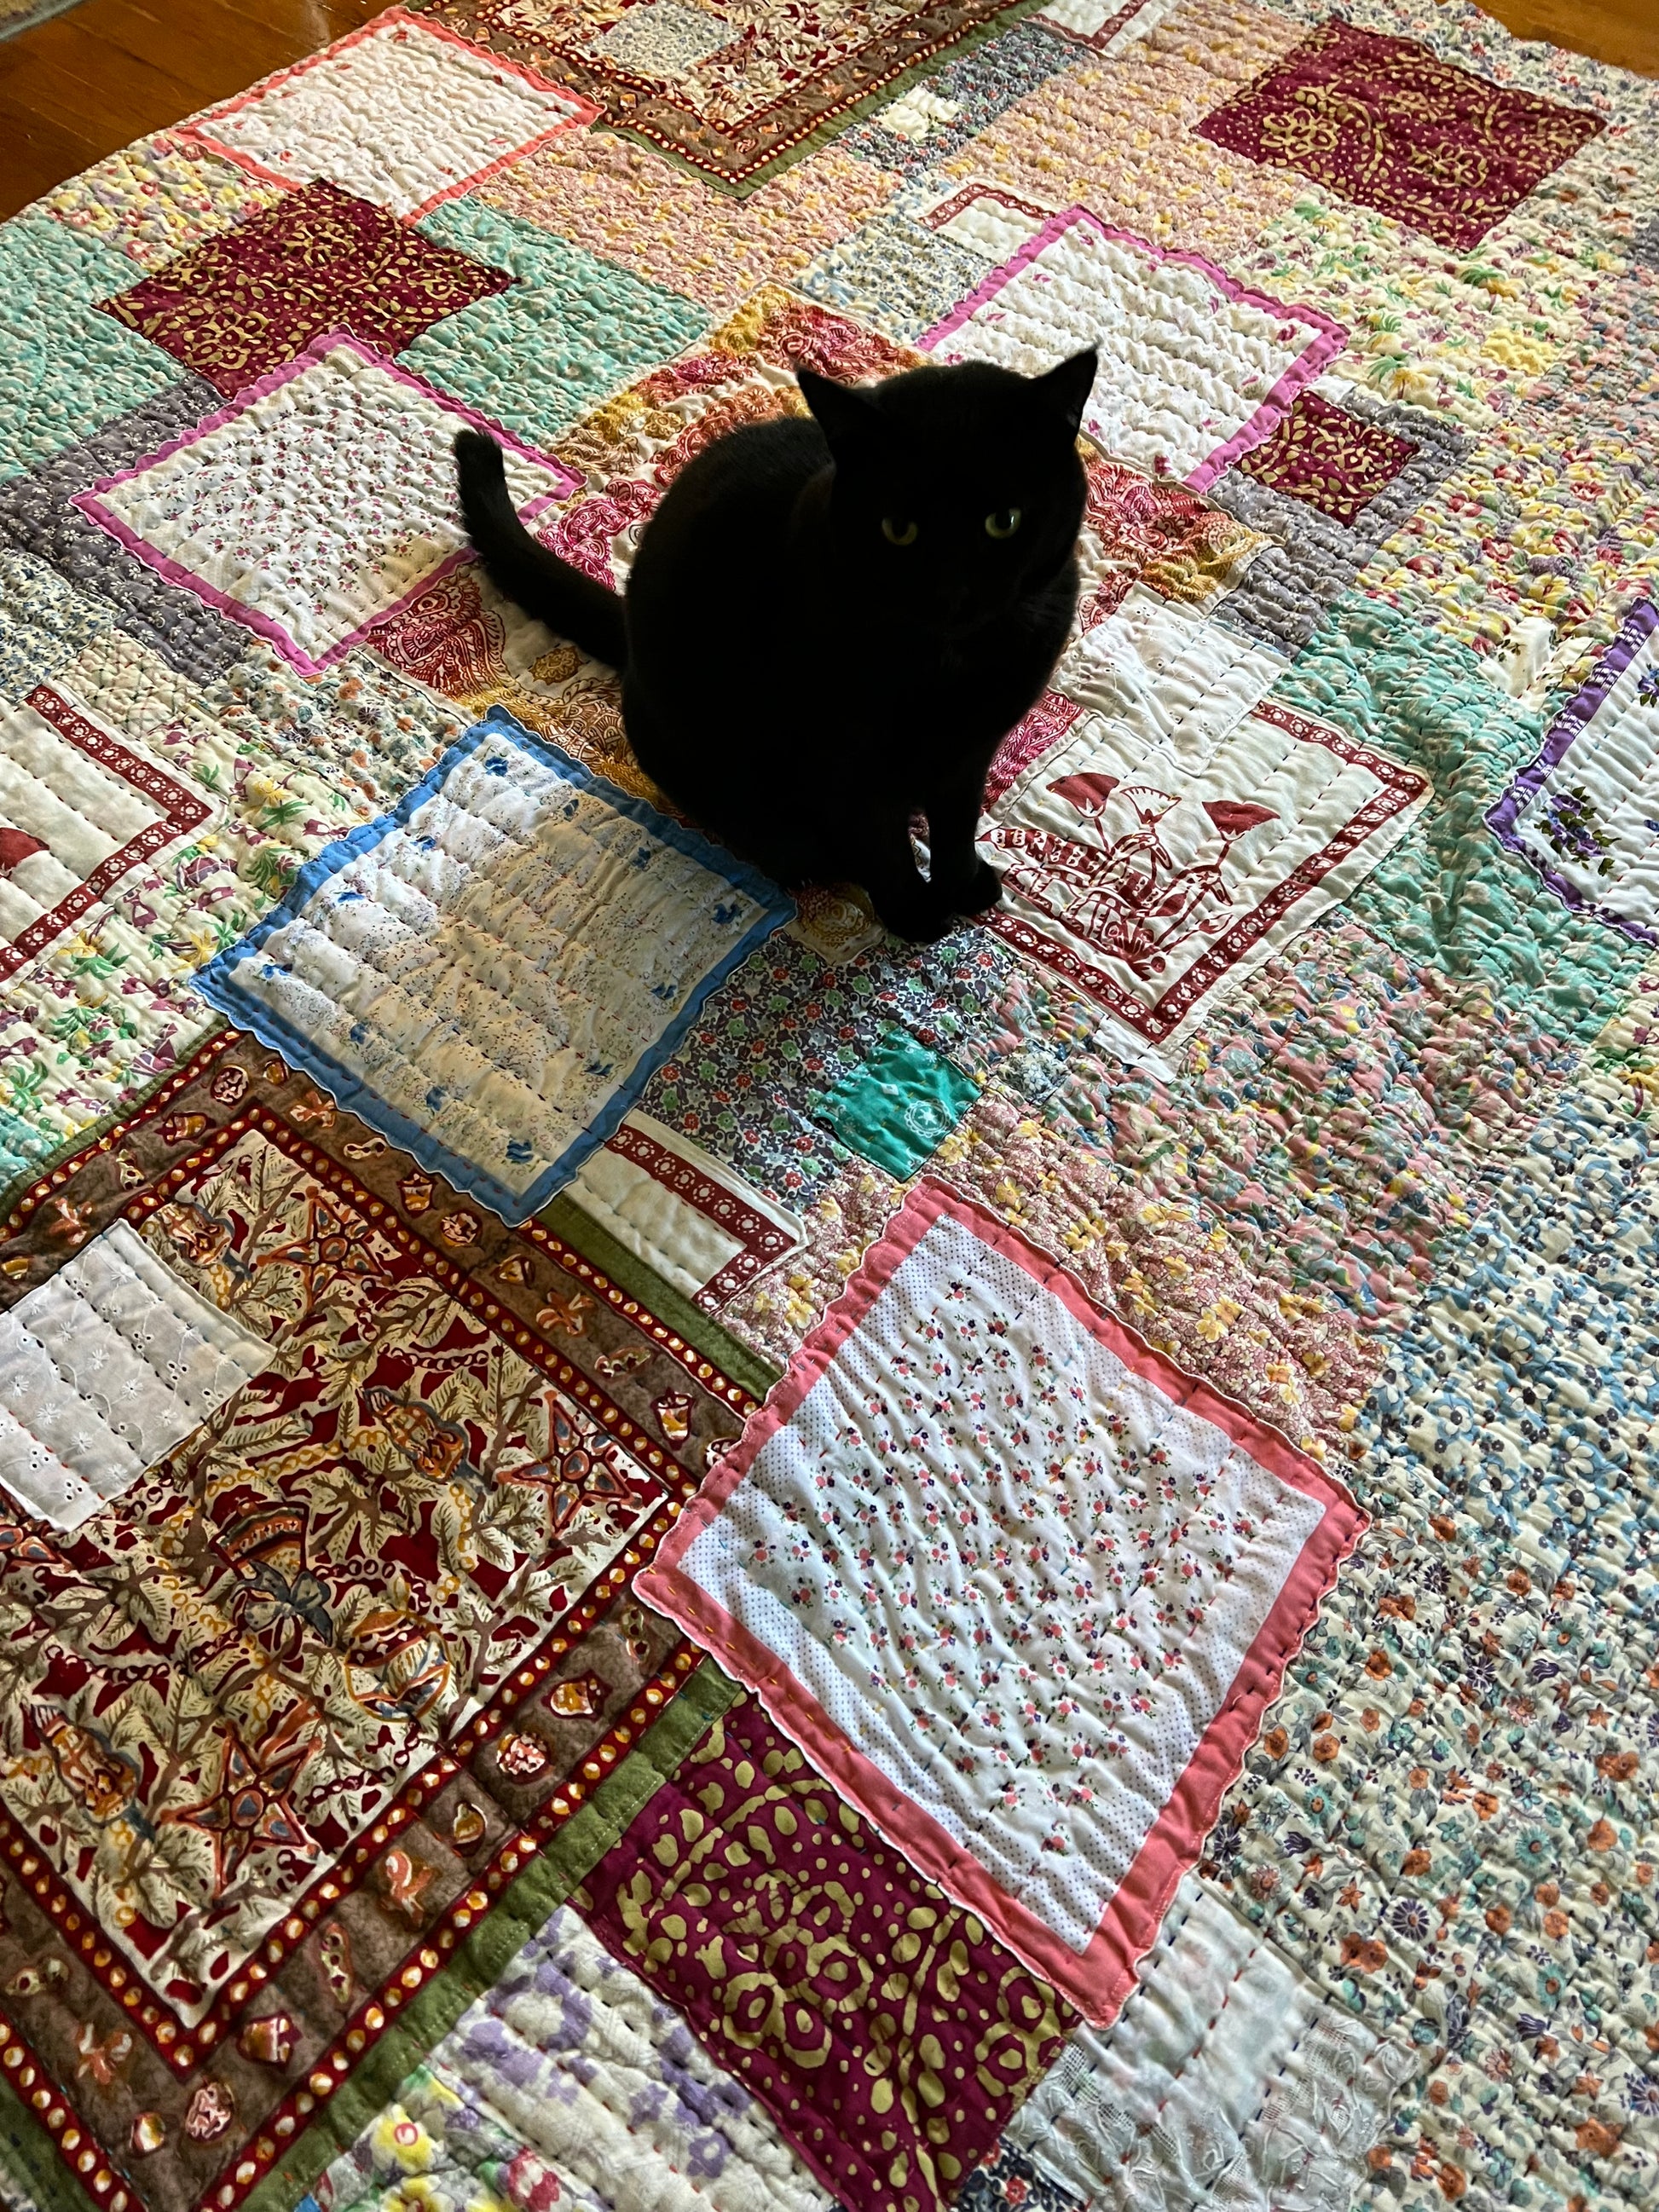 a black cat sits in the middle of the quilt, side/aerial view